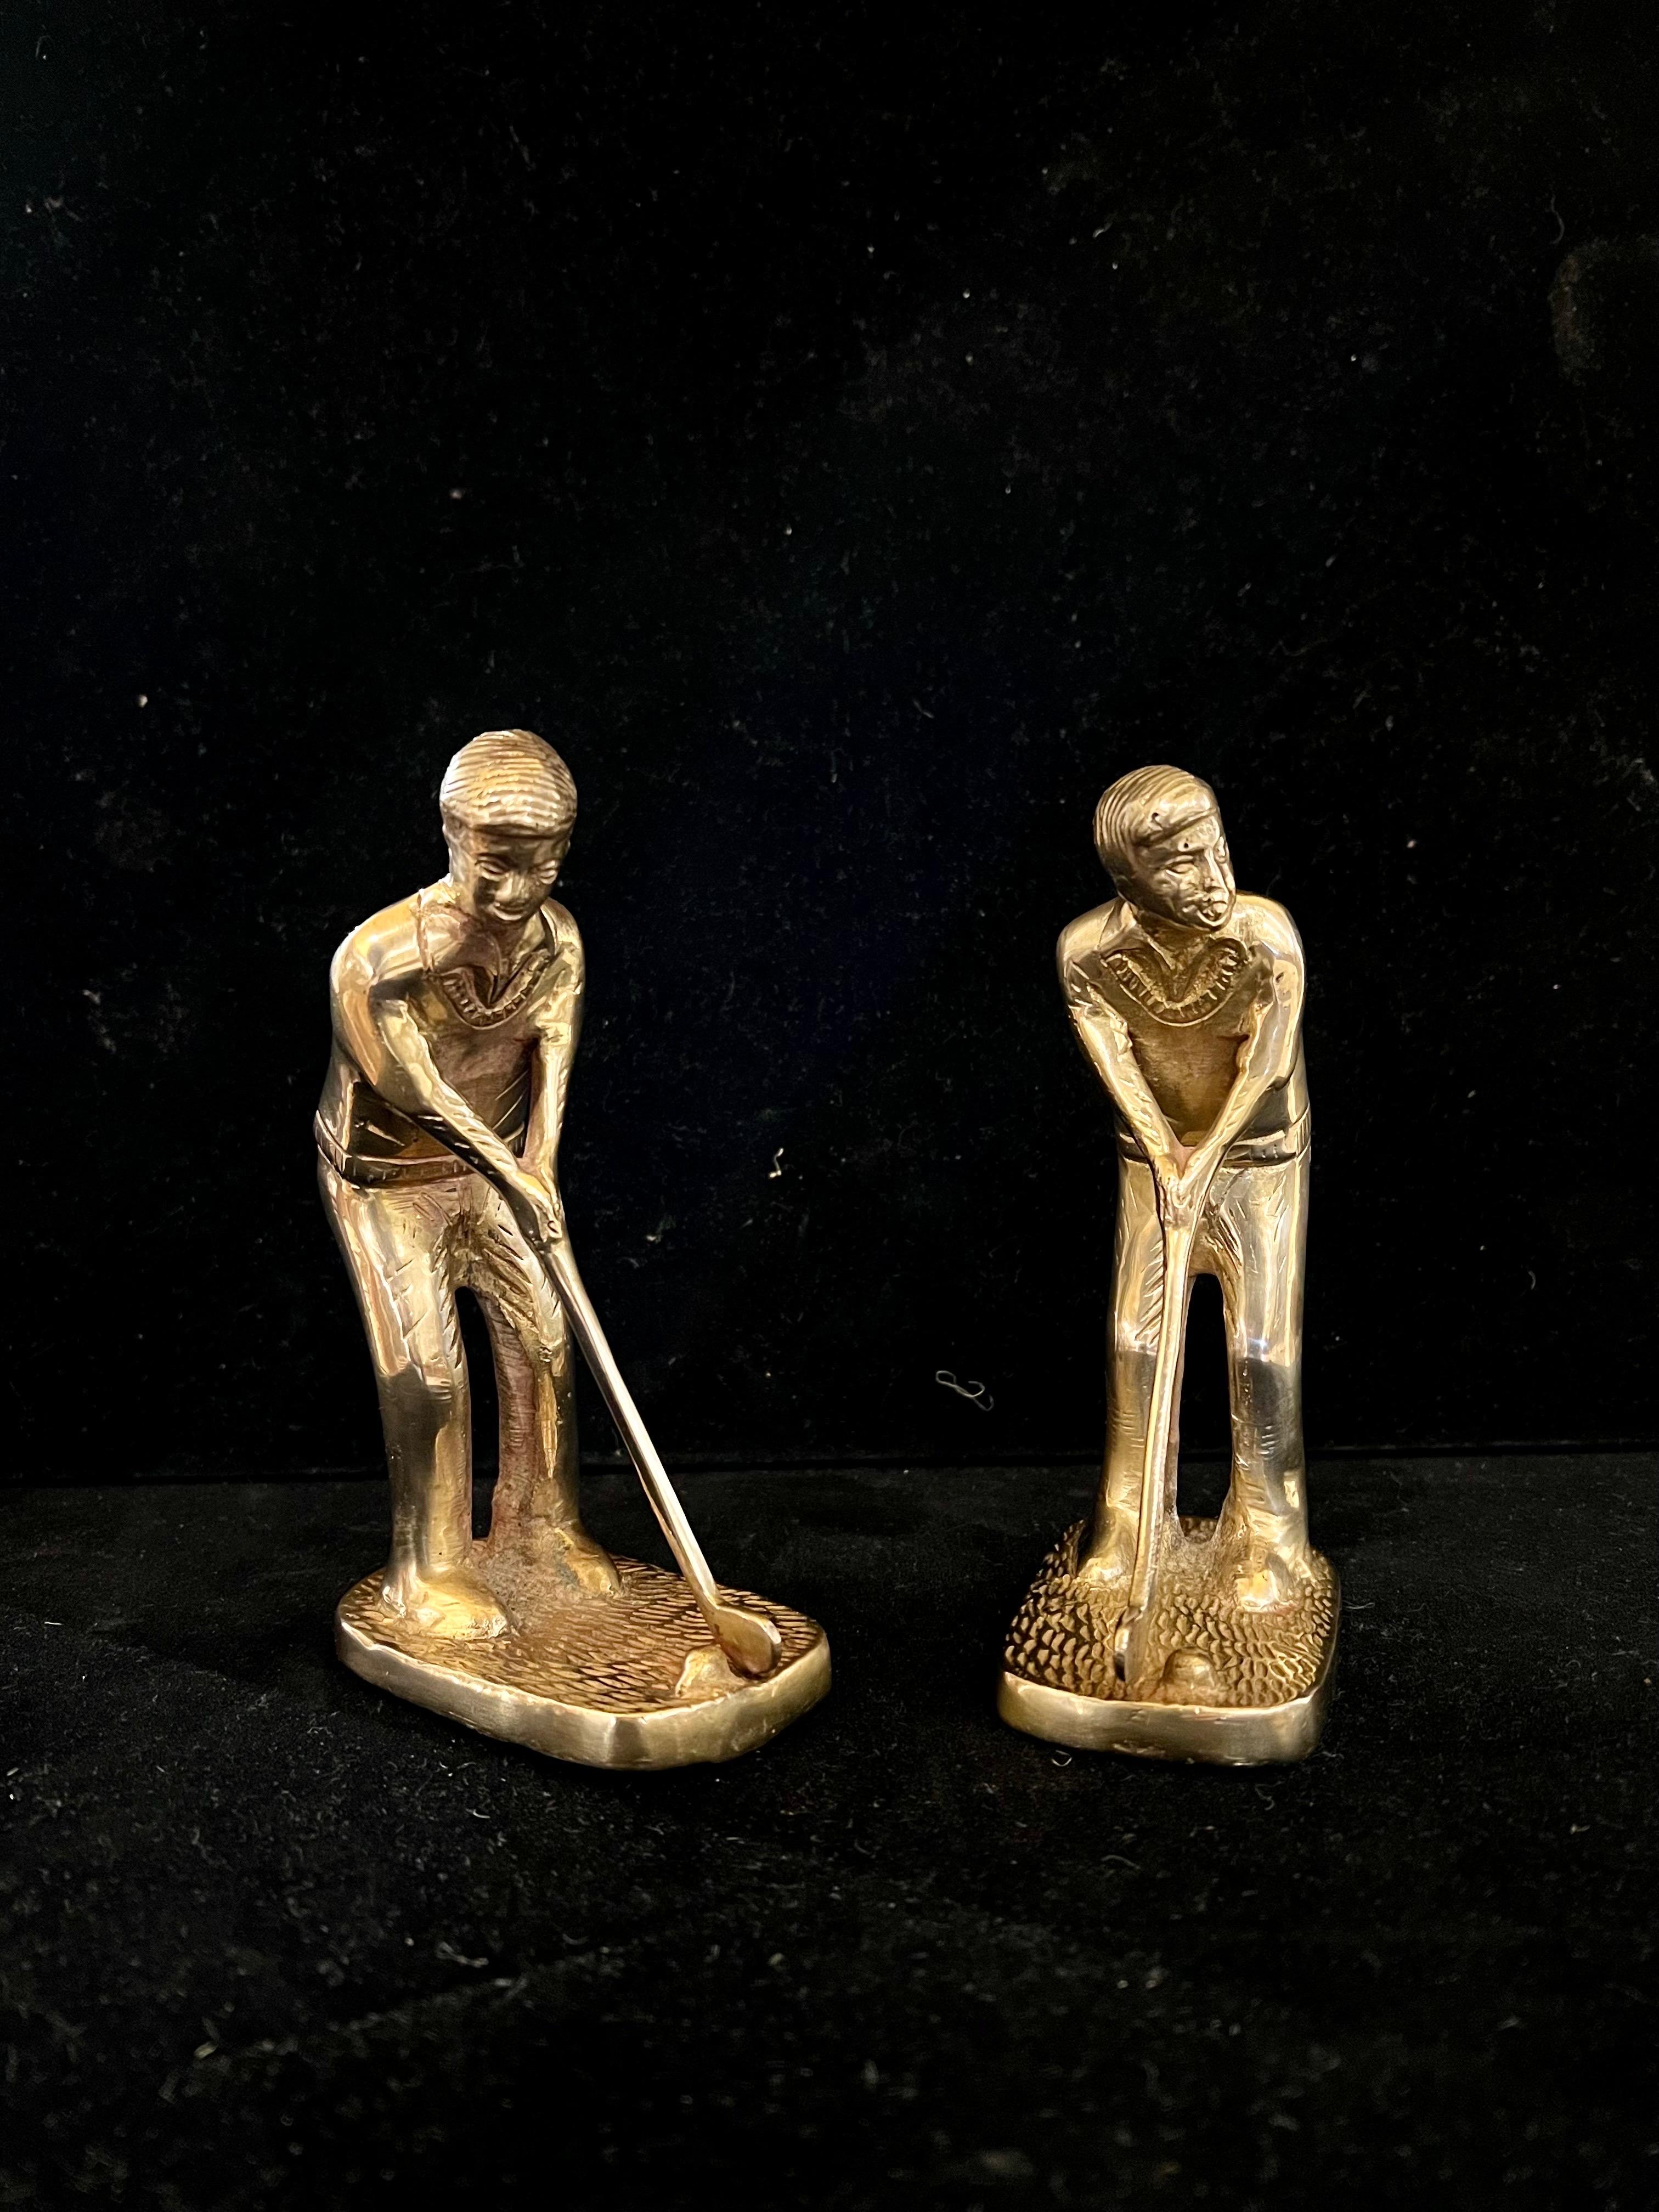 20th Century American Mid-Century Modern Pair of Polished Brass Golfer Bookends